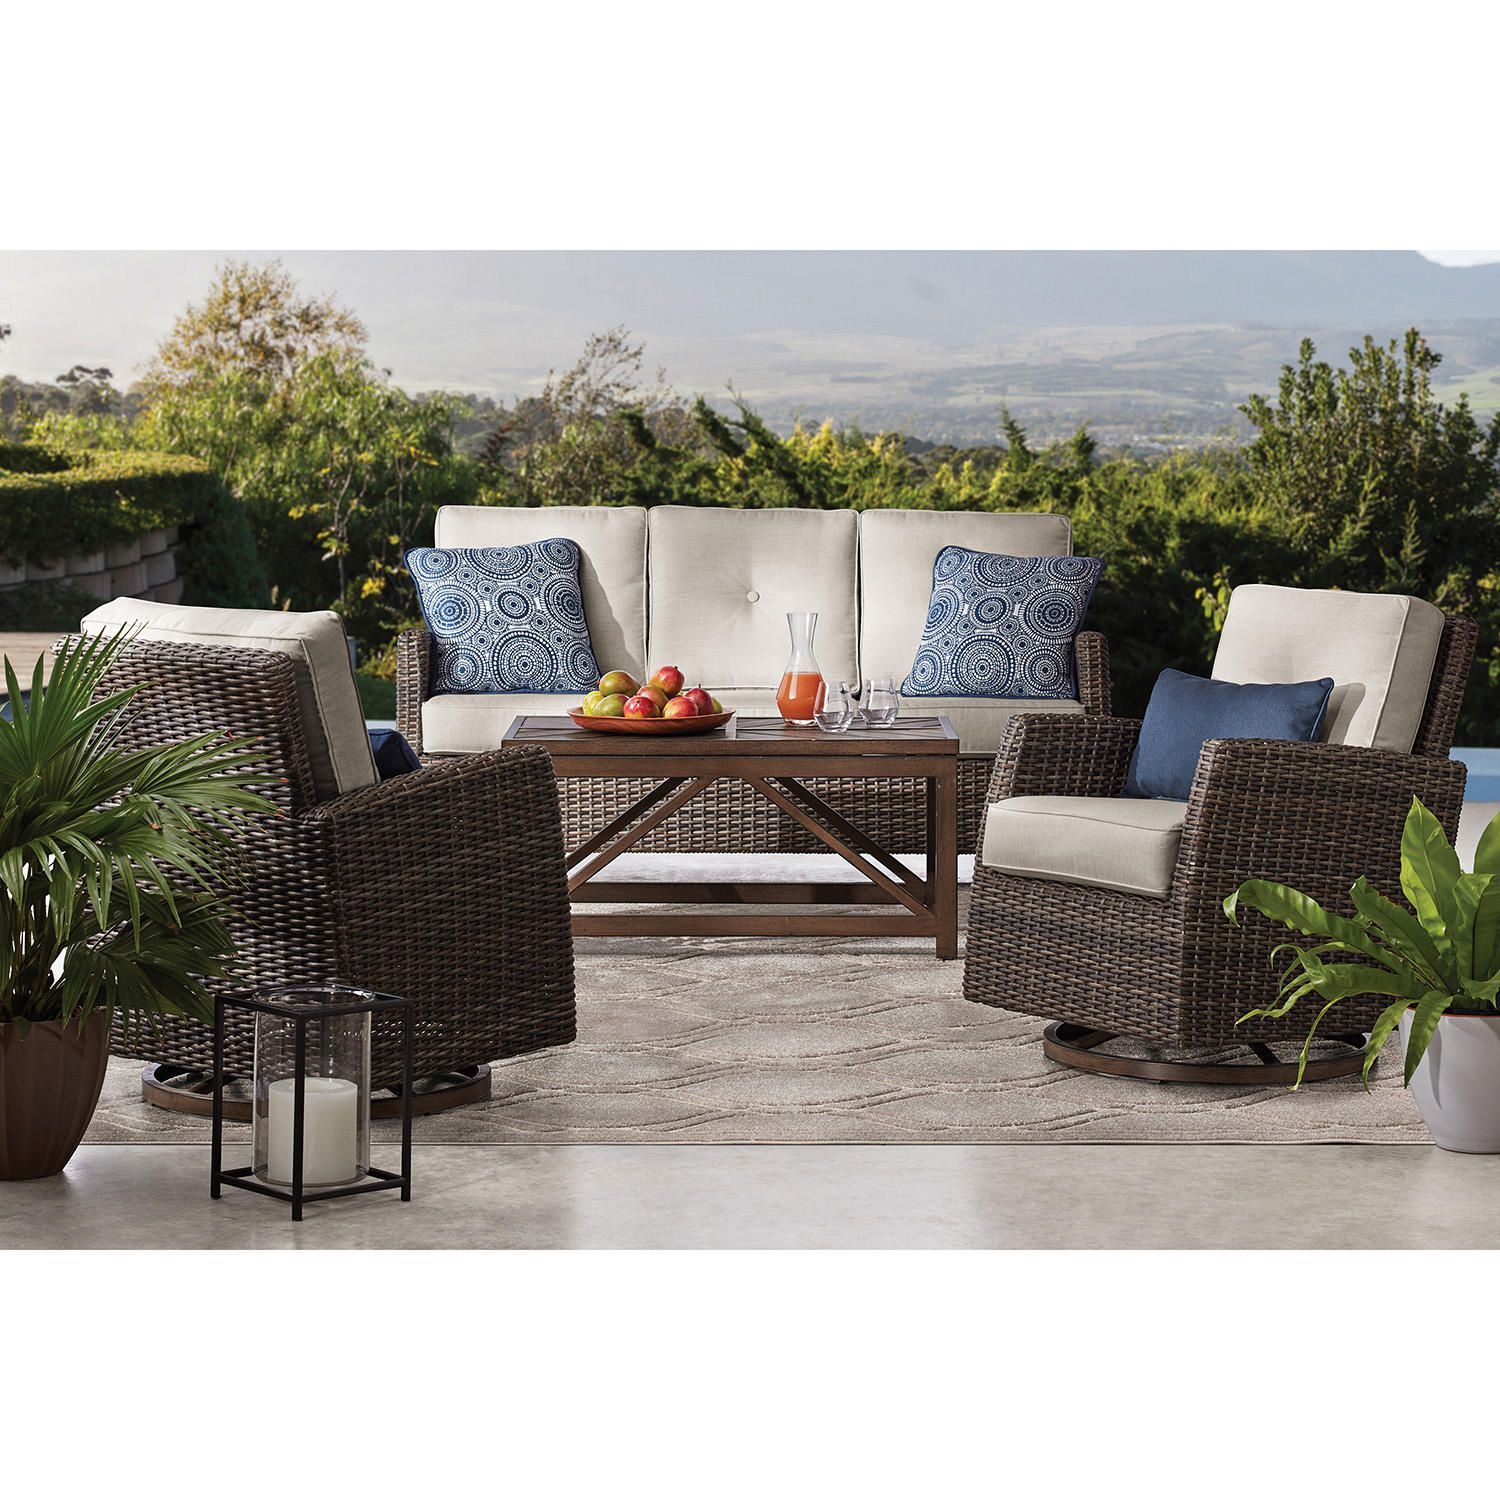 Member'S Mark Agio Fremont 4 Piece Patio Deep Seating Set With Inside 4 Piece Outdoor Seating Patio Sets (View 10 of 15)